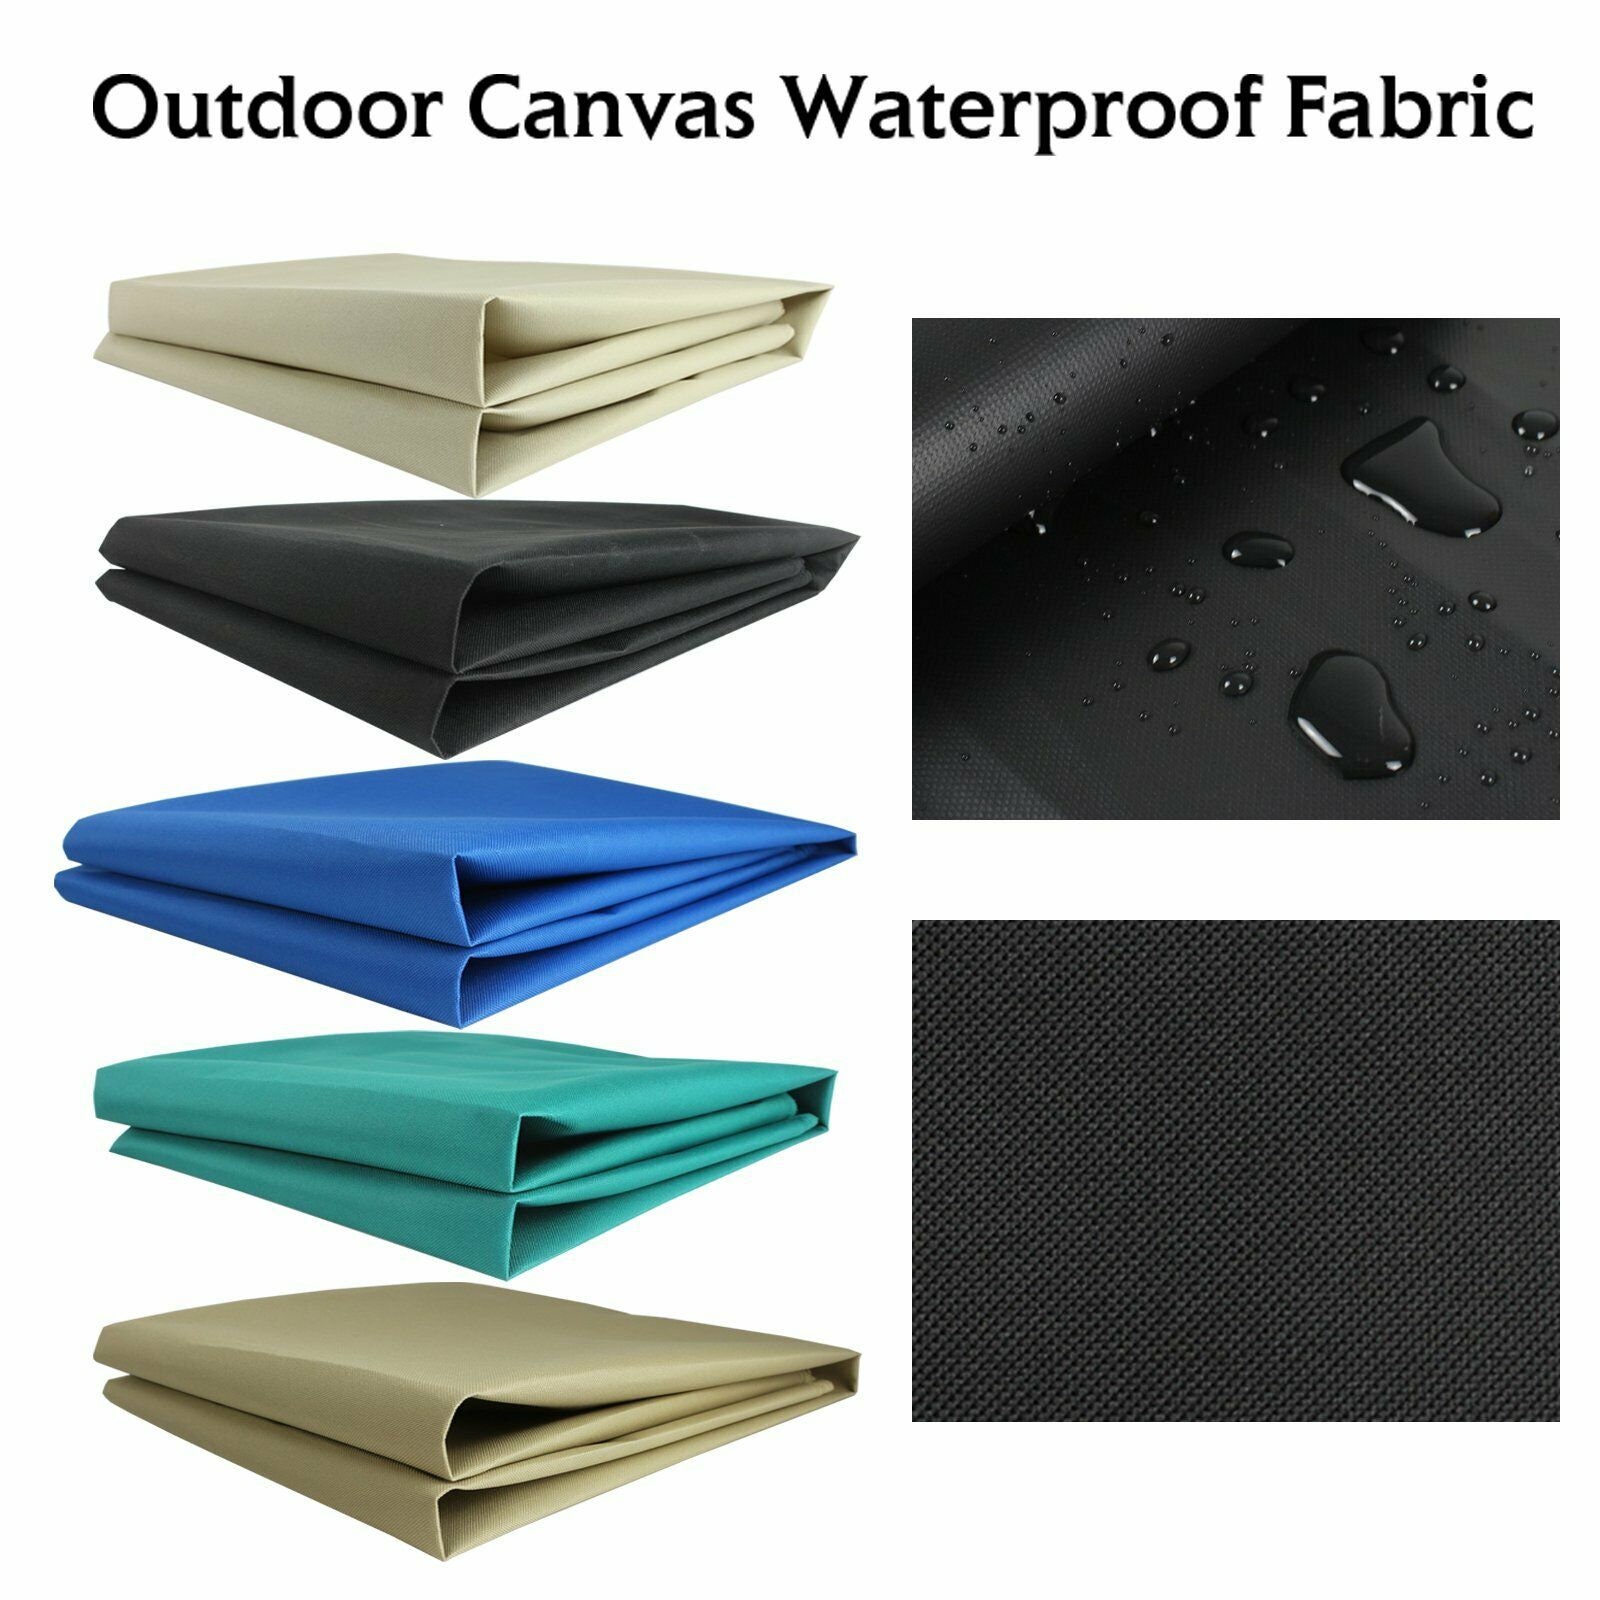 H/duty Waterproof Canvas Fabric Outdoor Patio Awning Canopy - Etsy ...